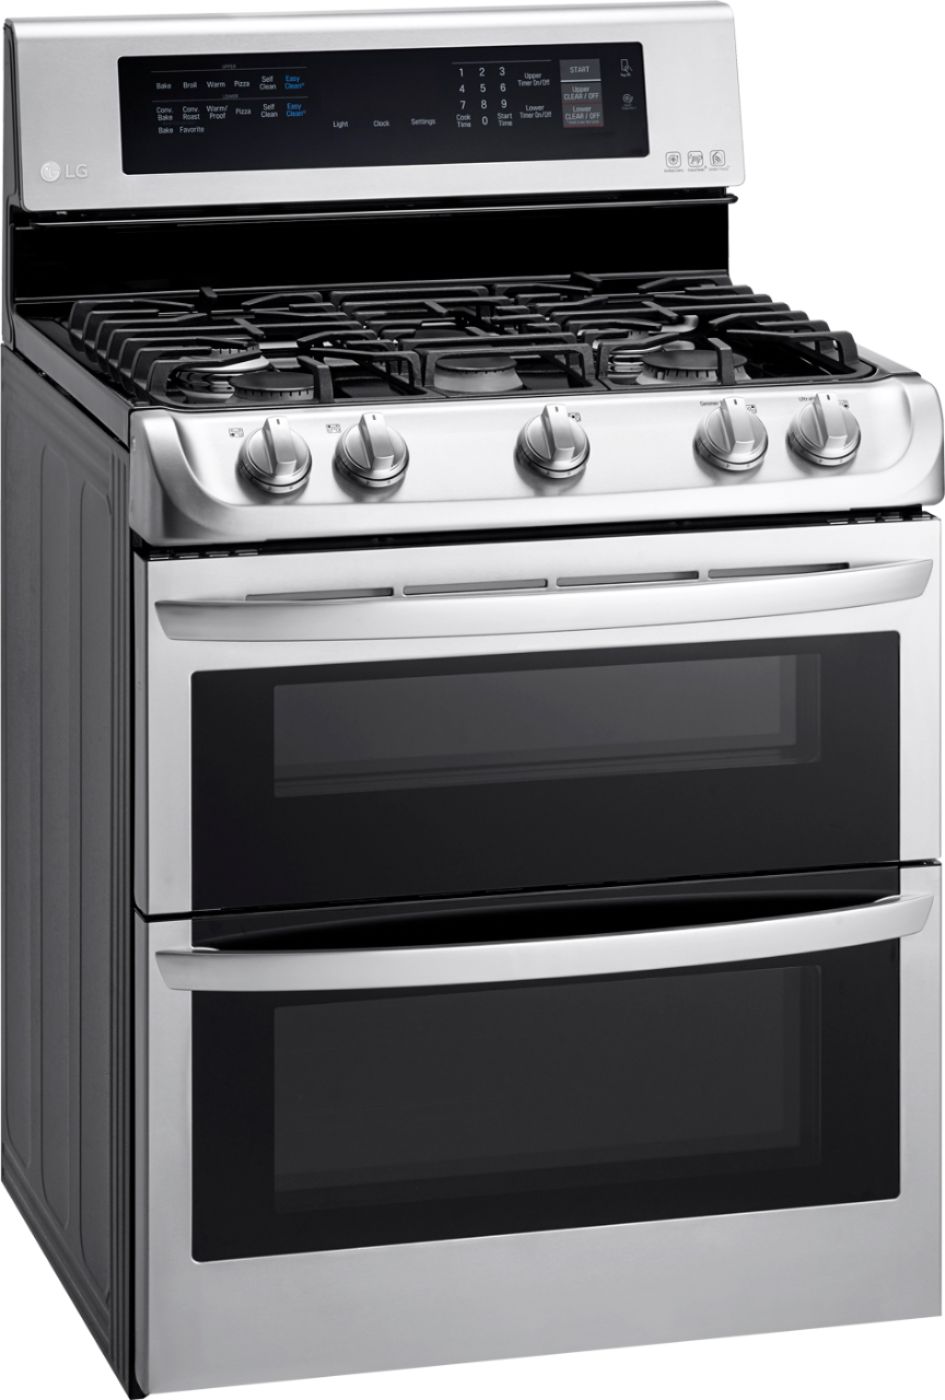 Angle View: Samsung - 6.0 Cu. Ft. Front Control Slide-in Gas Range with Smart Dial, Air Fry & Wi-Fi, Fingerprint Resistant - Tuscan stainless steel